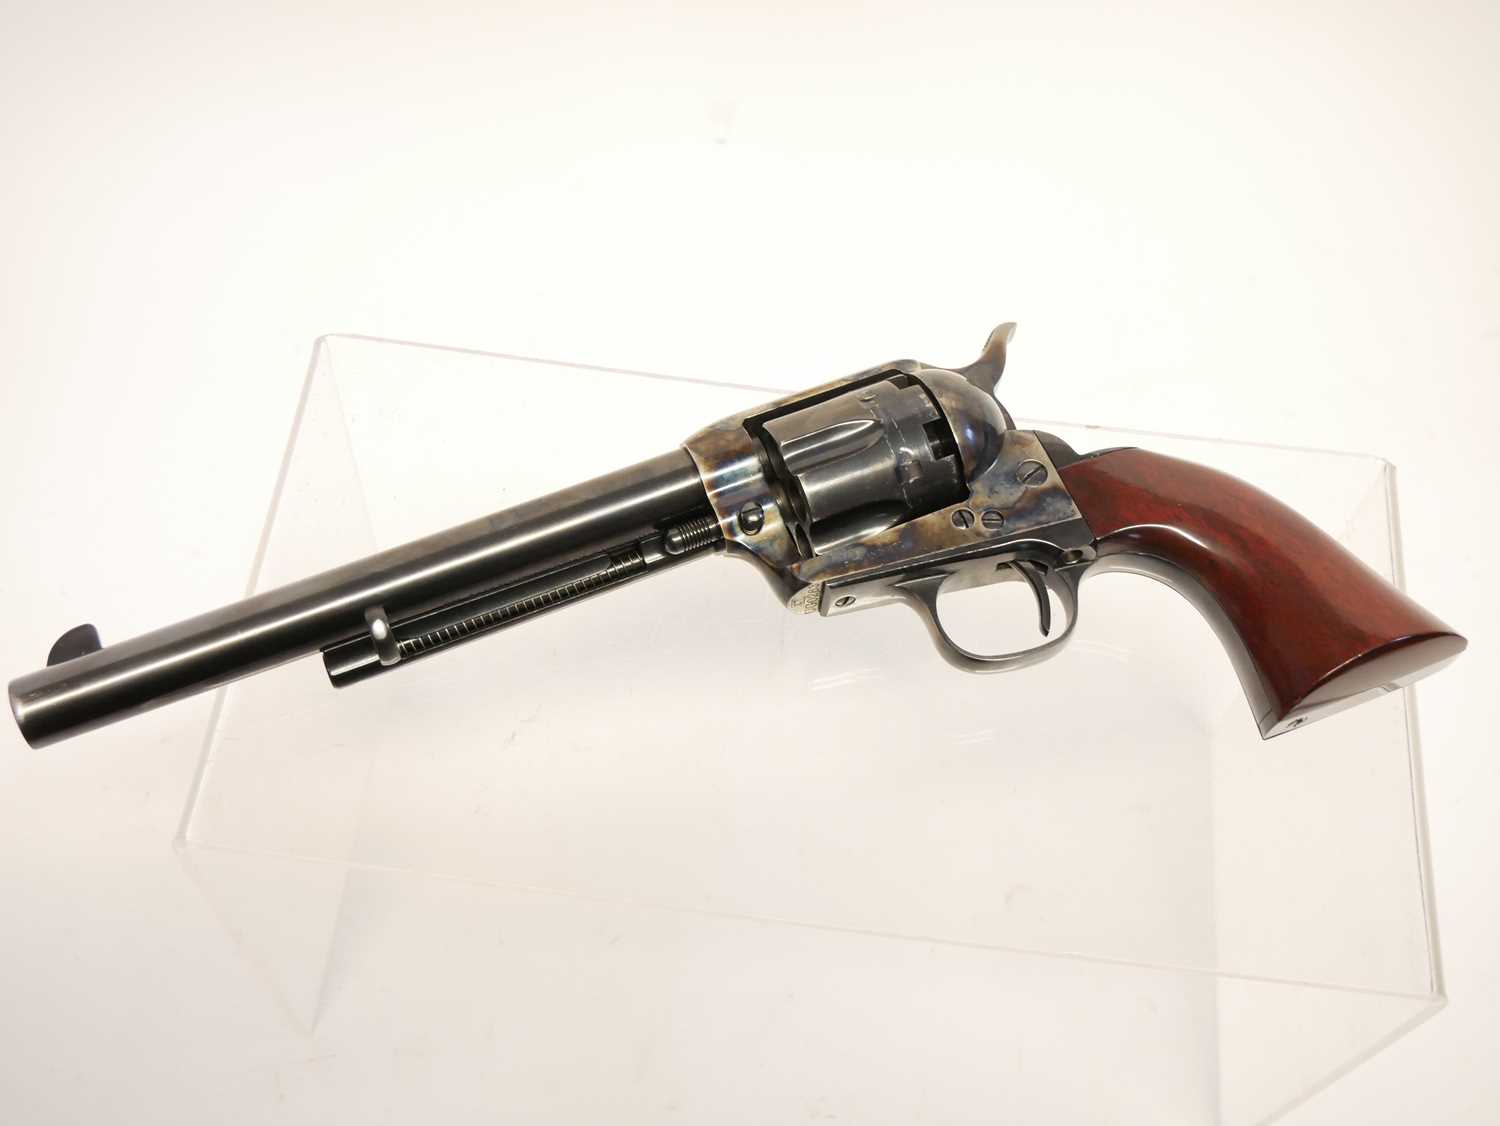 Uberti .44 percussion muzzle loading cattleman revolver, serial number UG0263, 7.5inch barrel, - Image 5 of 10